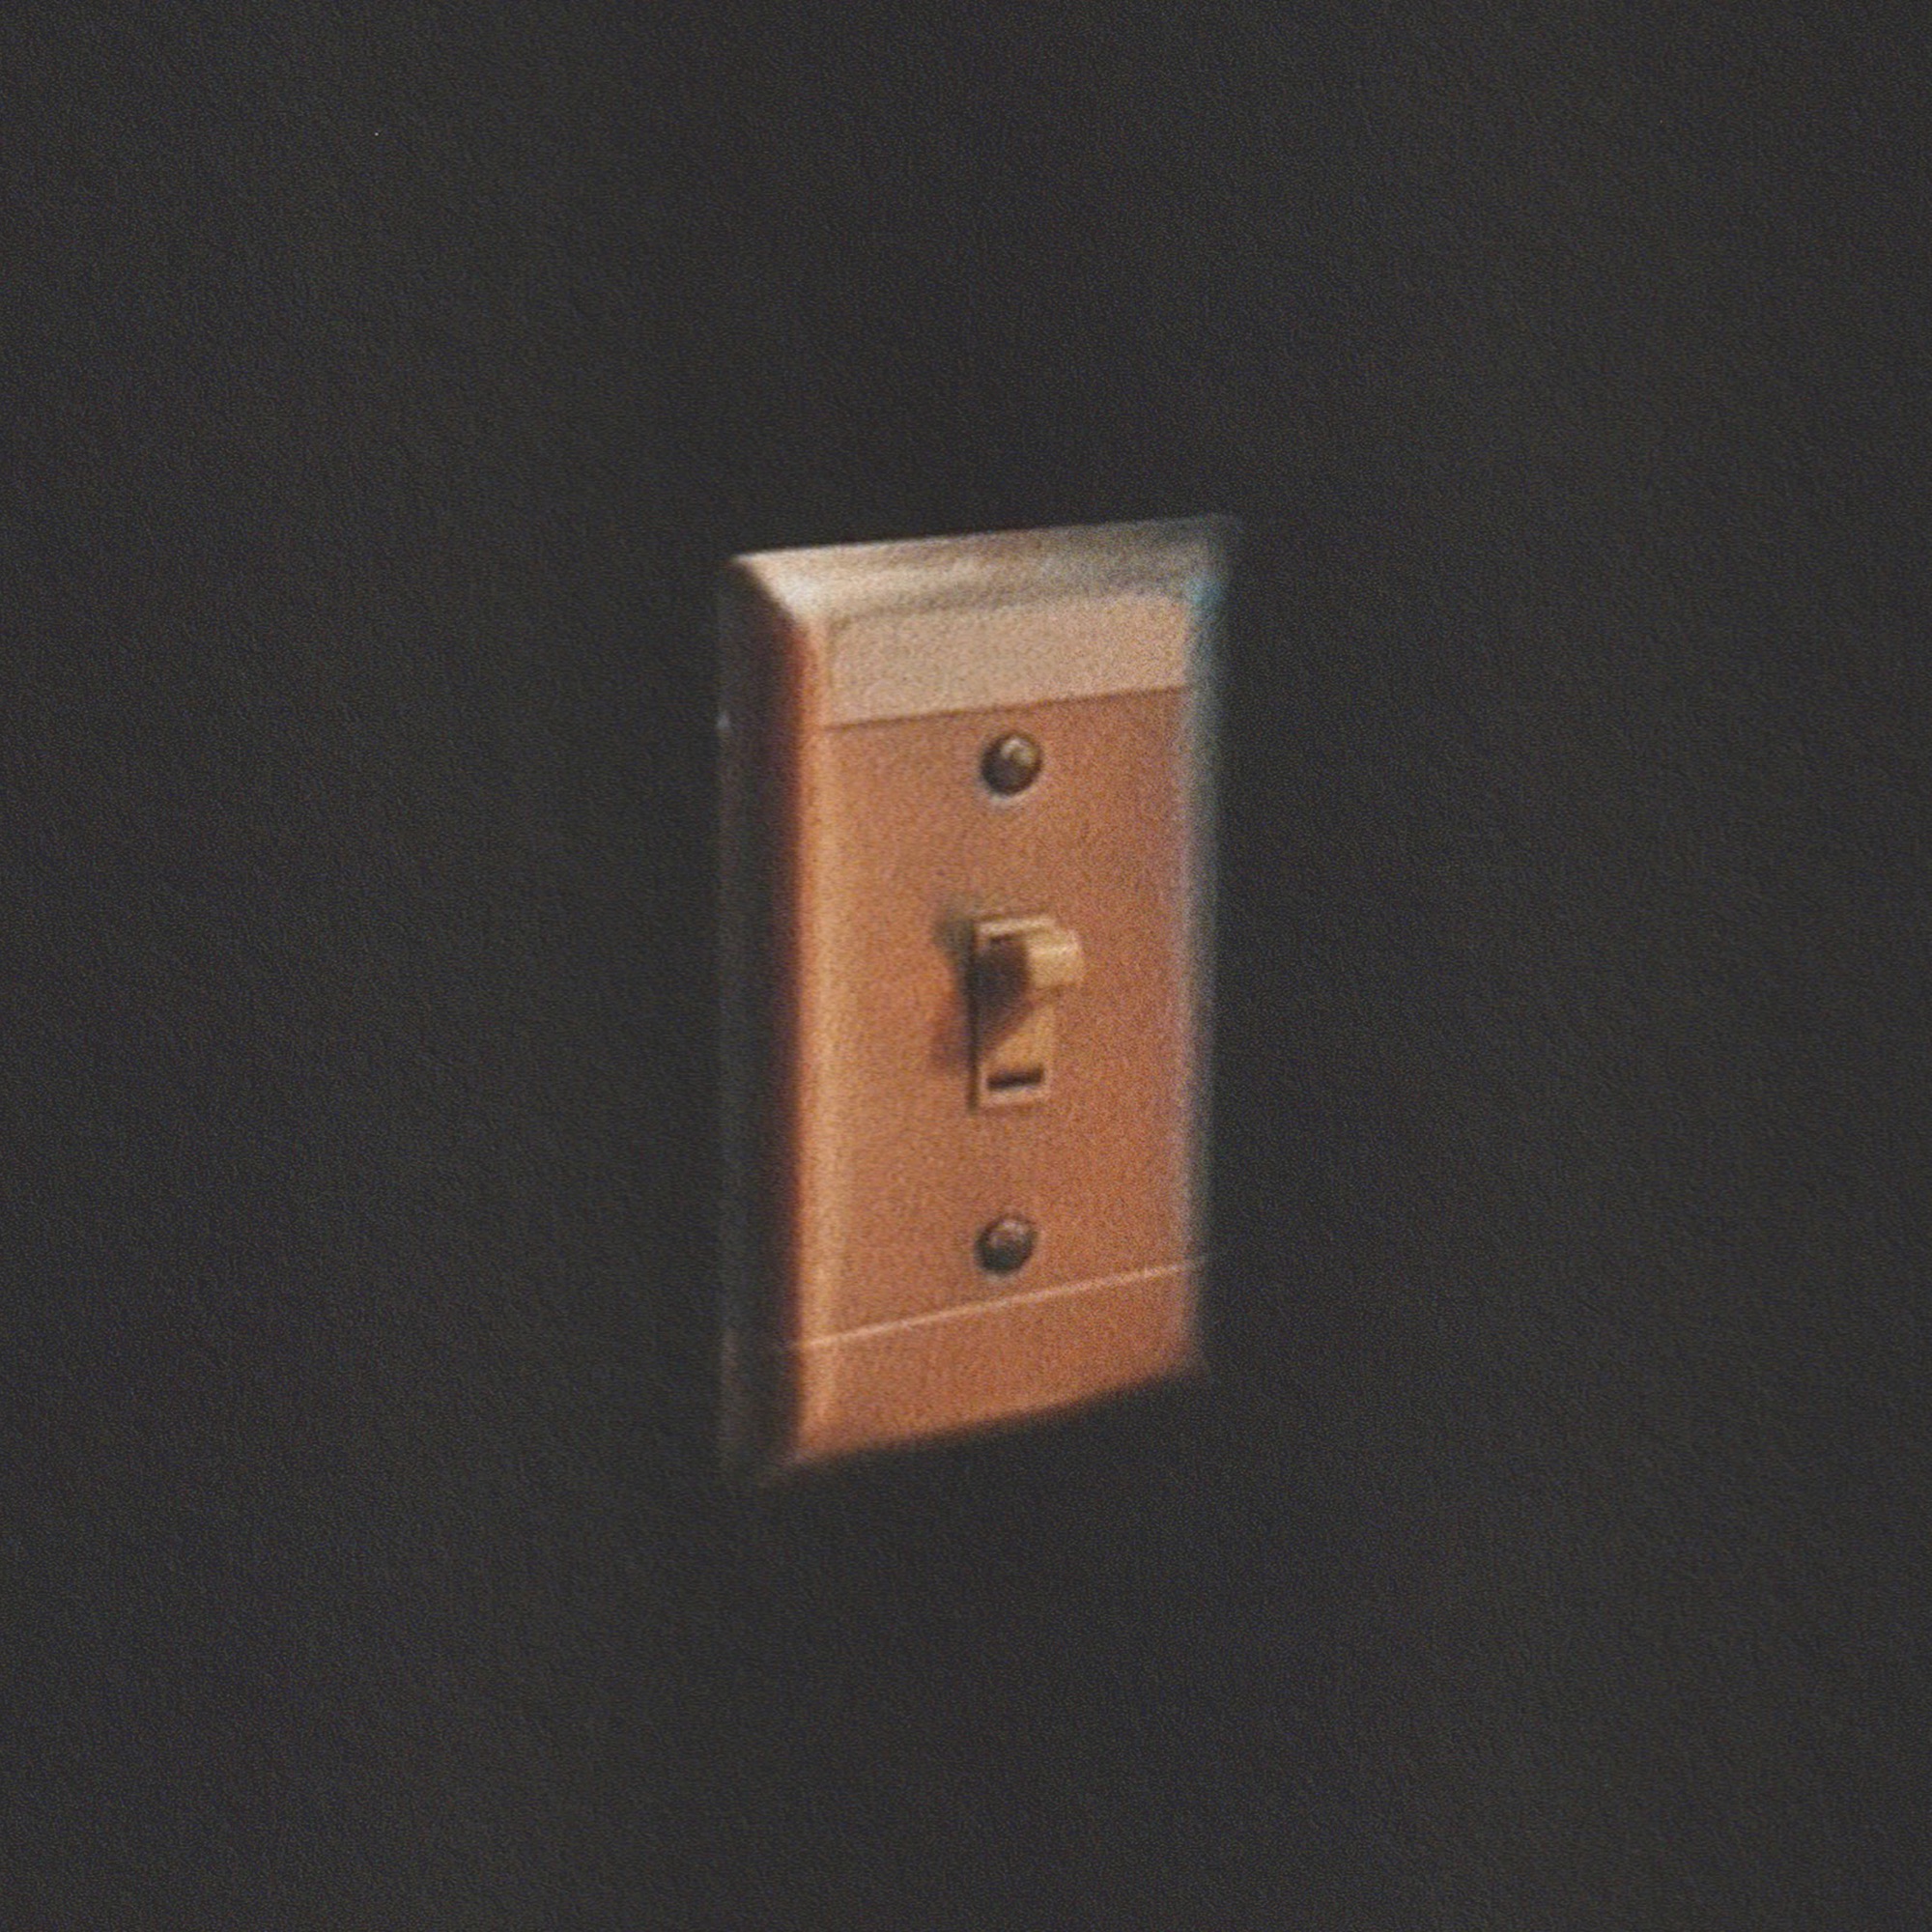 Art for Light Switch by Charlie Puth